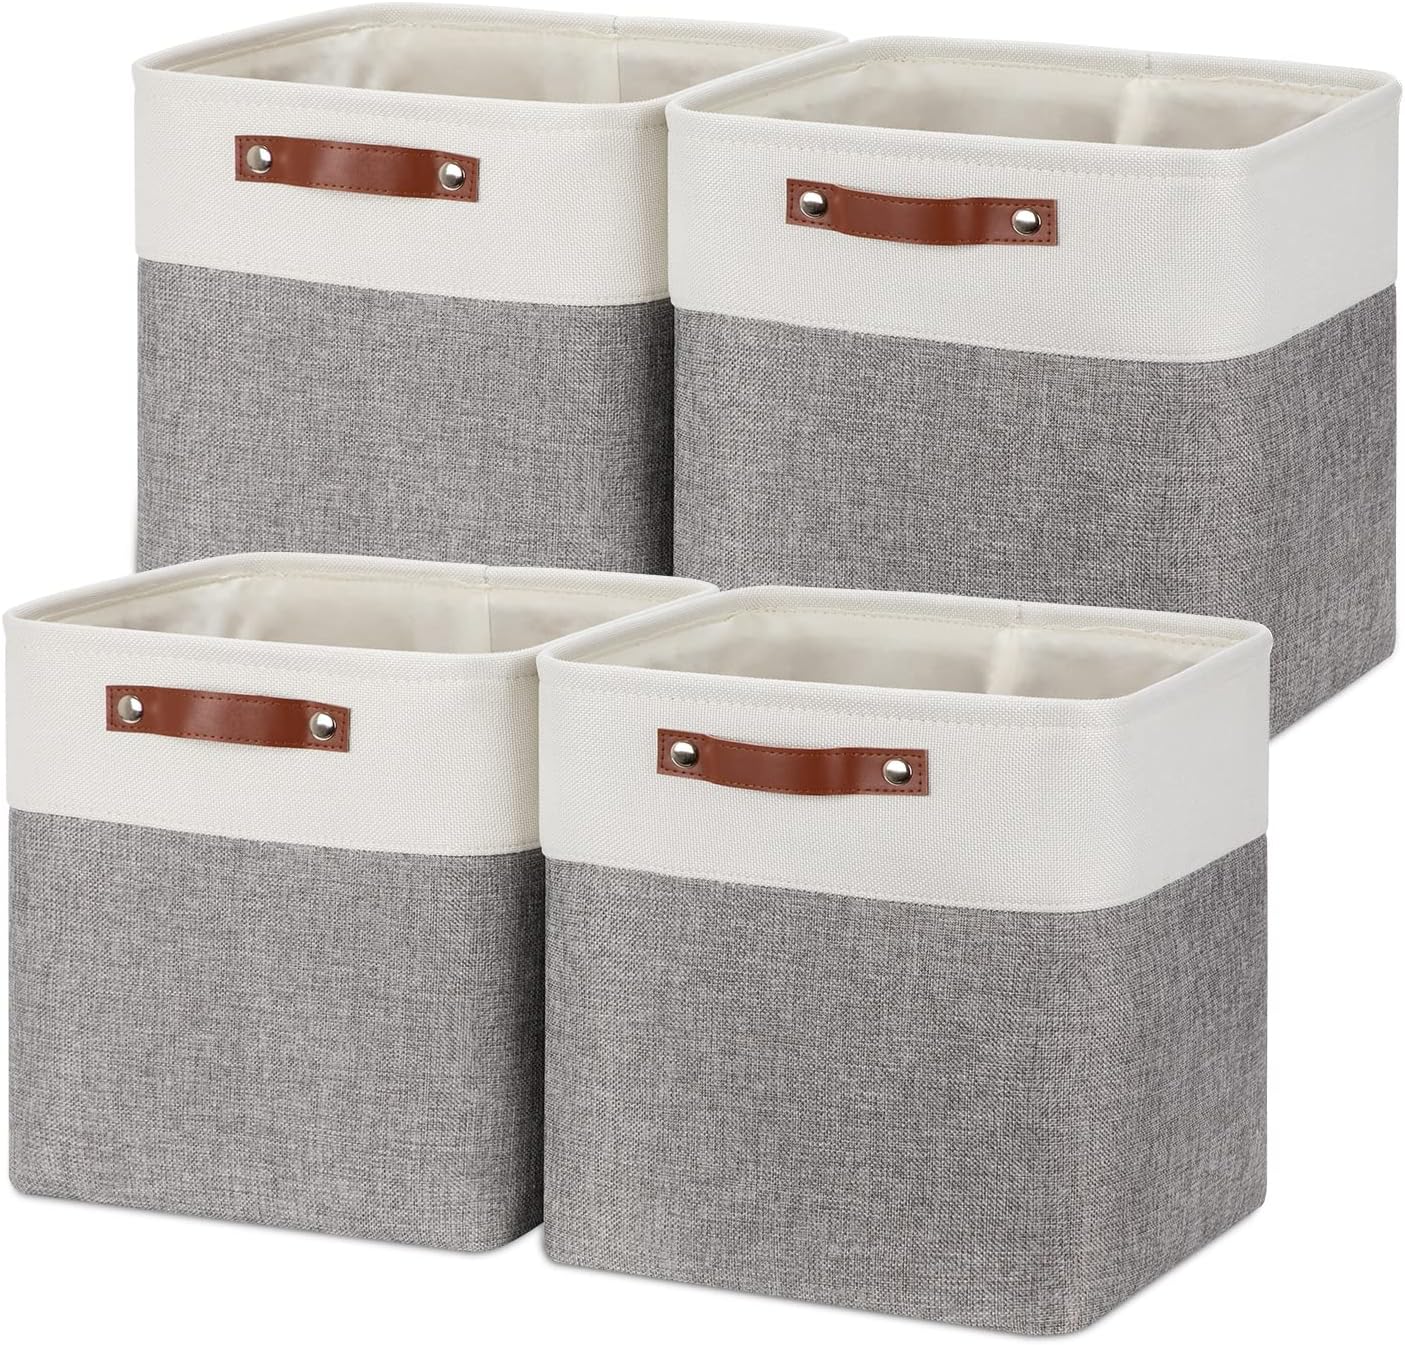 Temary 12 Inch Storage Baskets Foldable Fabric Storage Cubes 4PCs Storage Bins Organizer with Handles, Baskets for Organizing Clothes, Toys, Towels (White & Grey, 12 x 12 x 12)